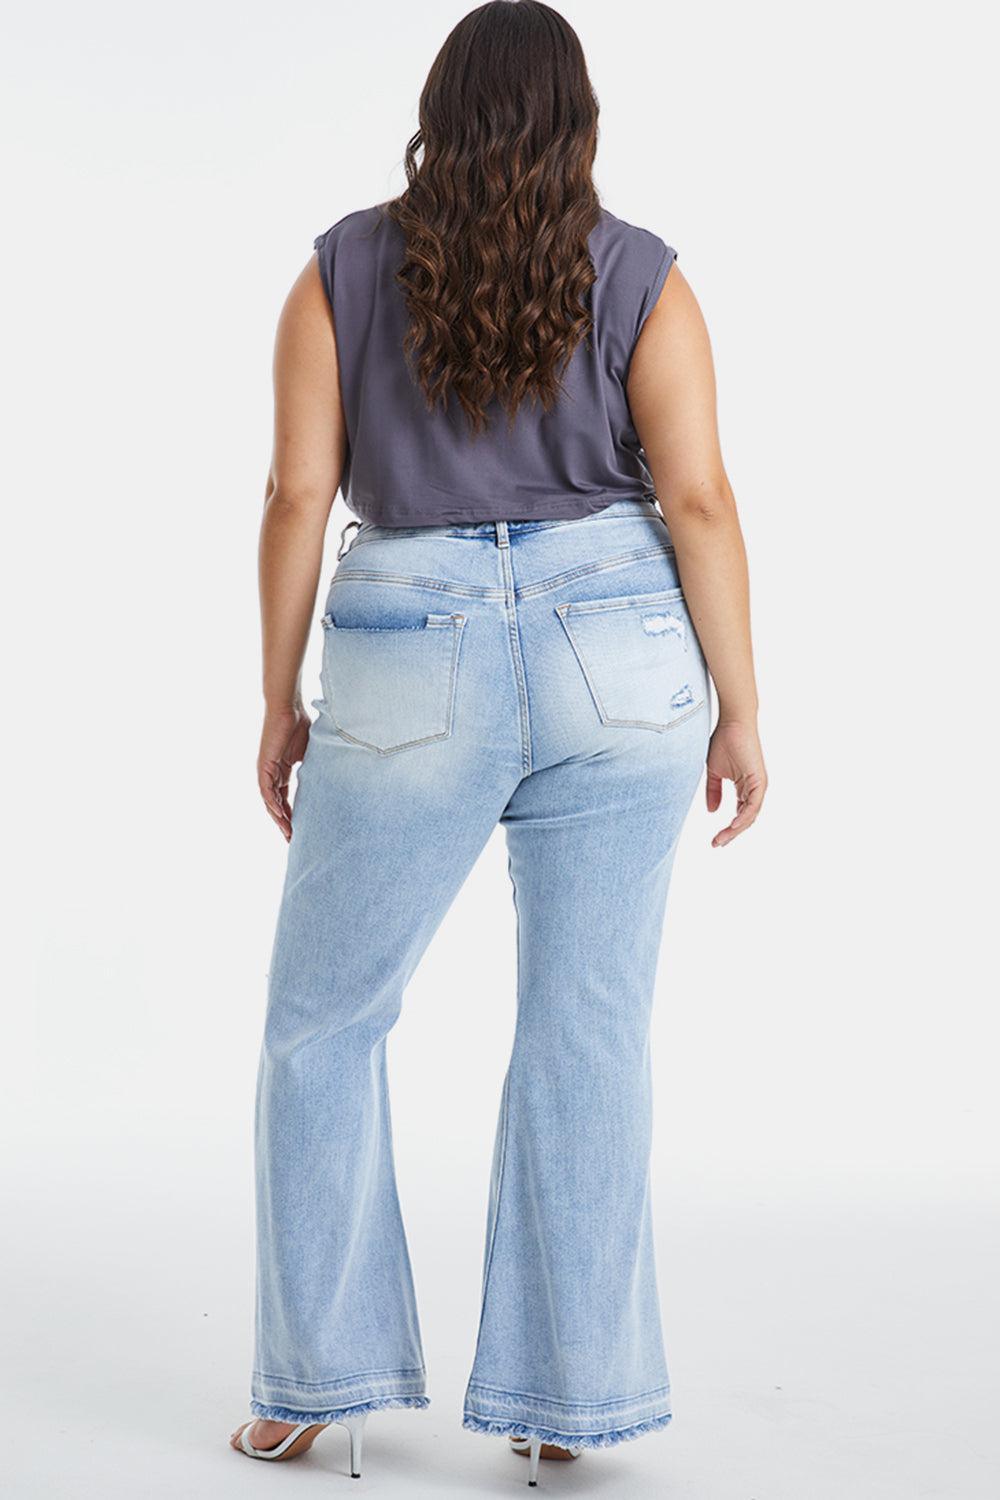 a woman in high rise jeans is facing away from the camera